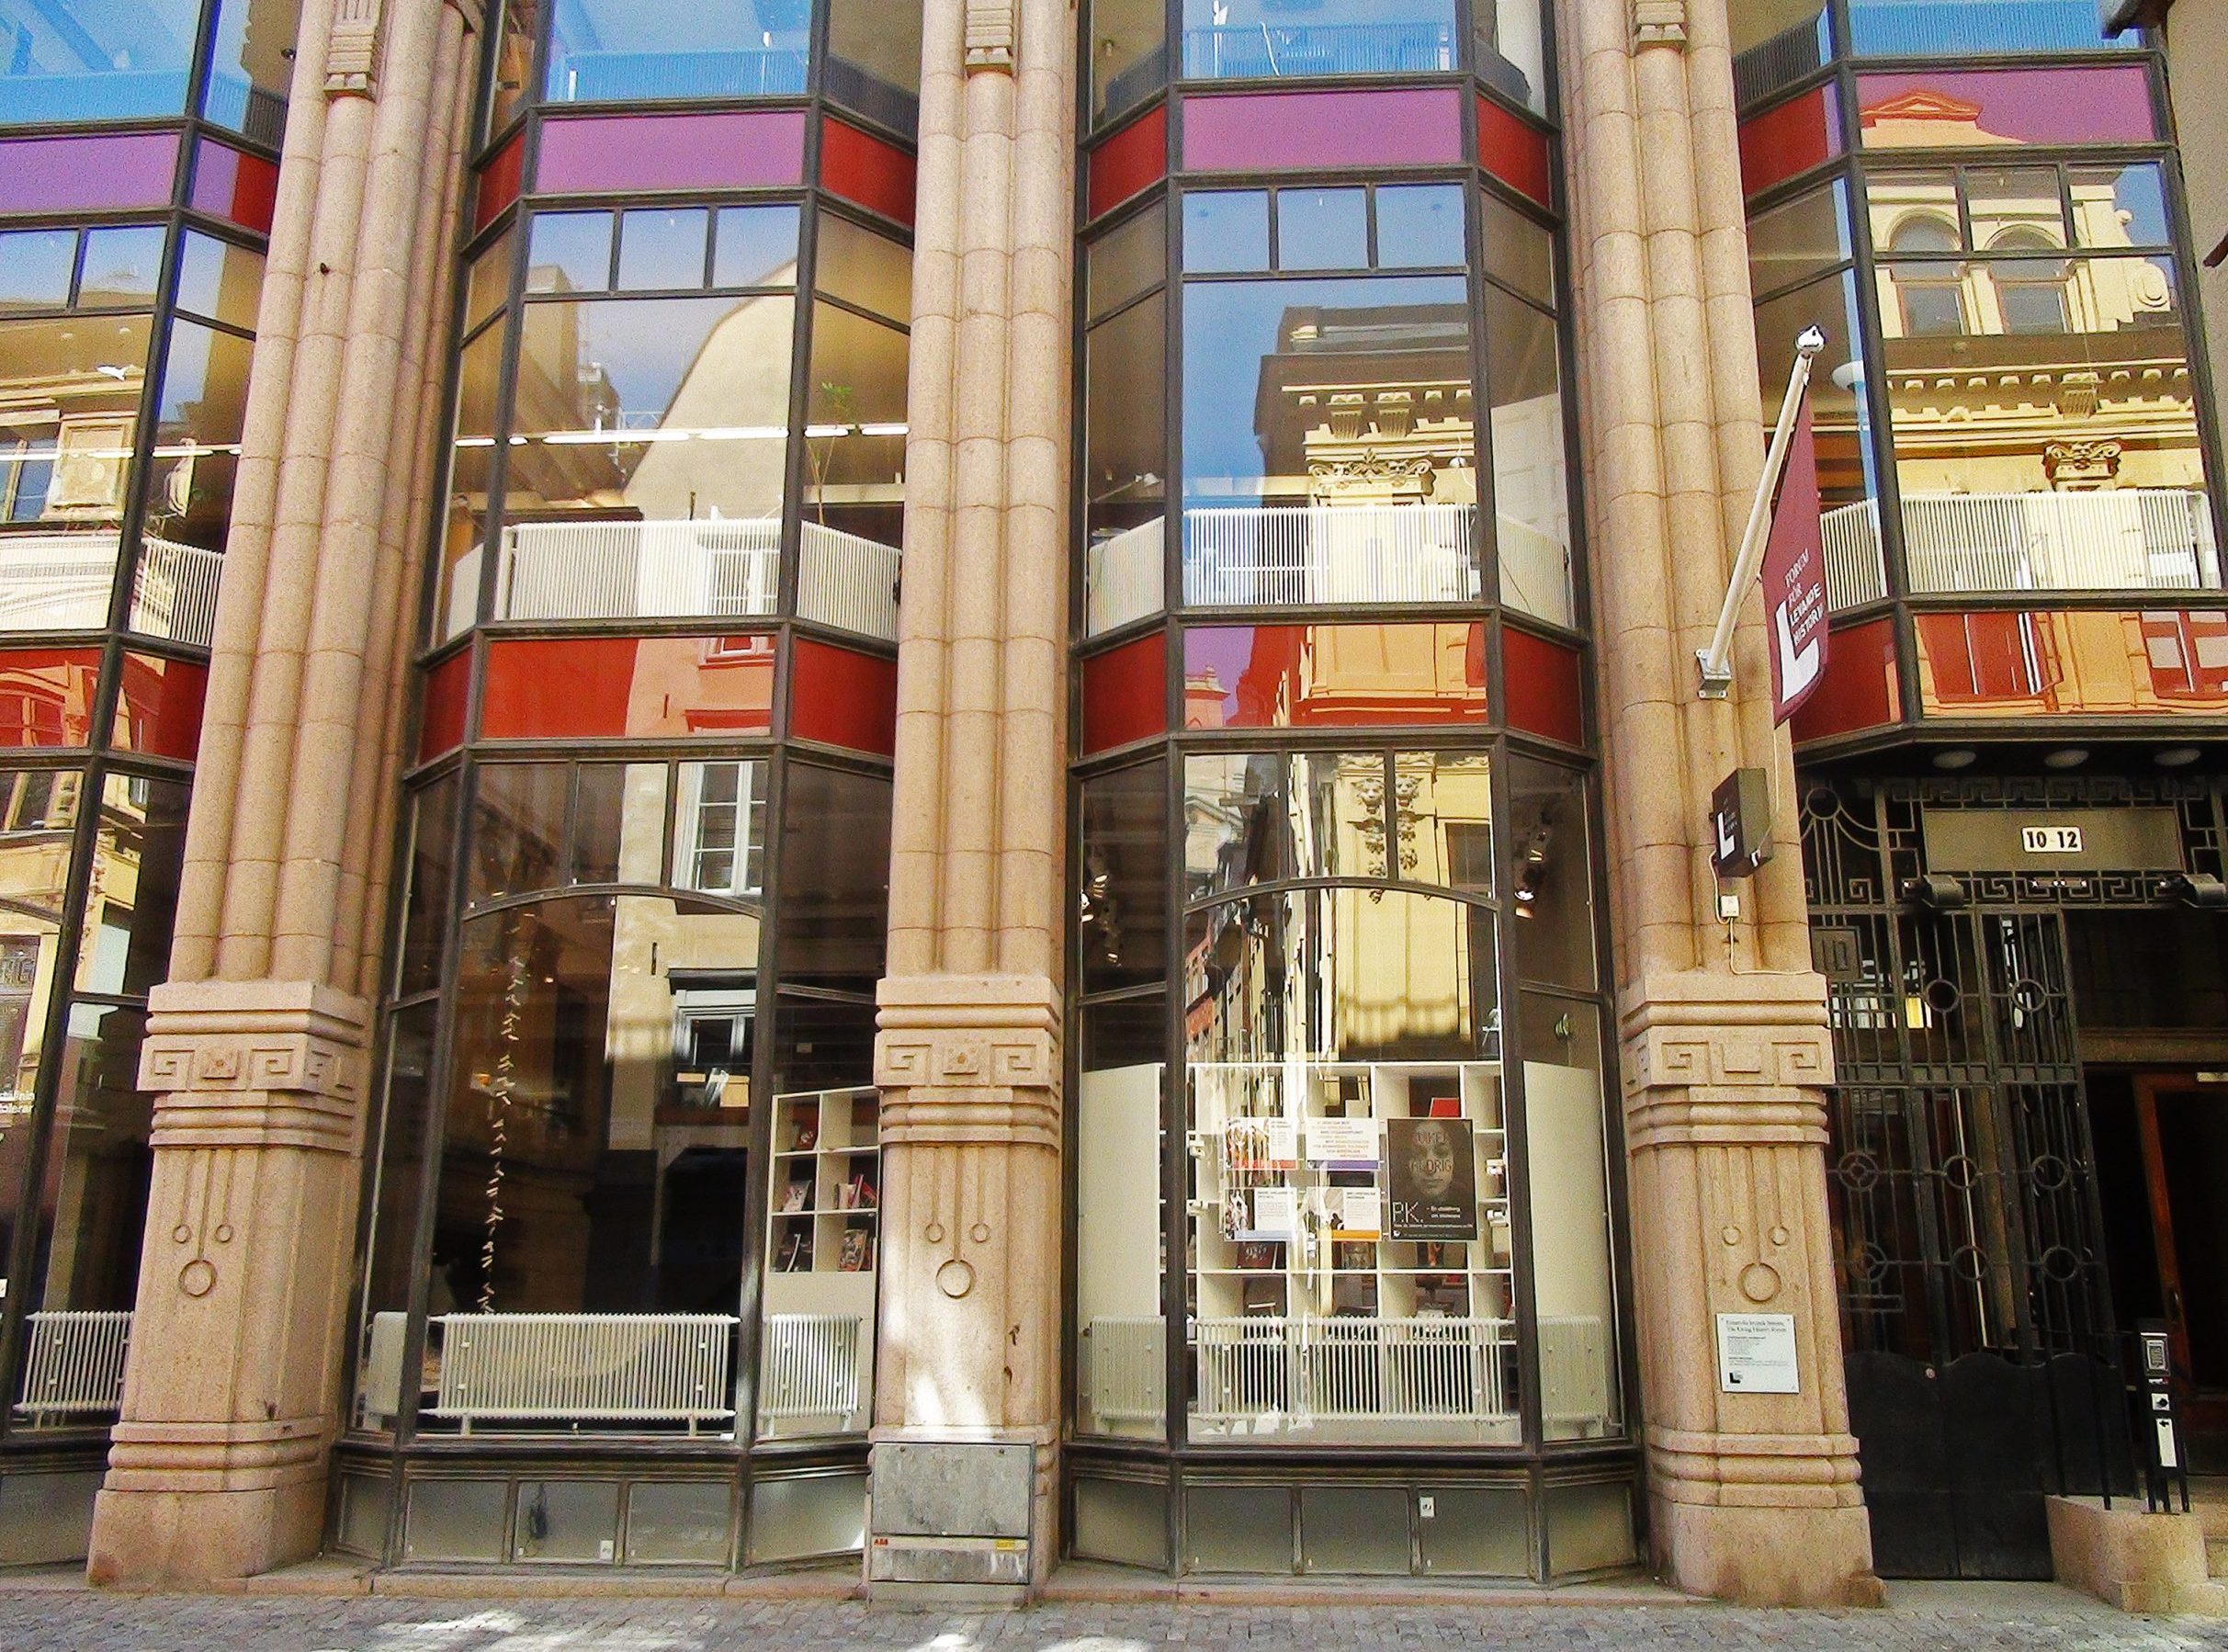 The image shows the facade of the building.